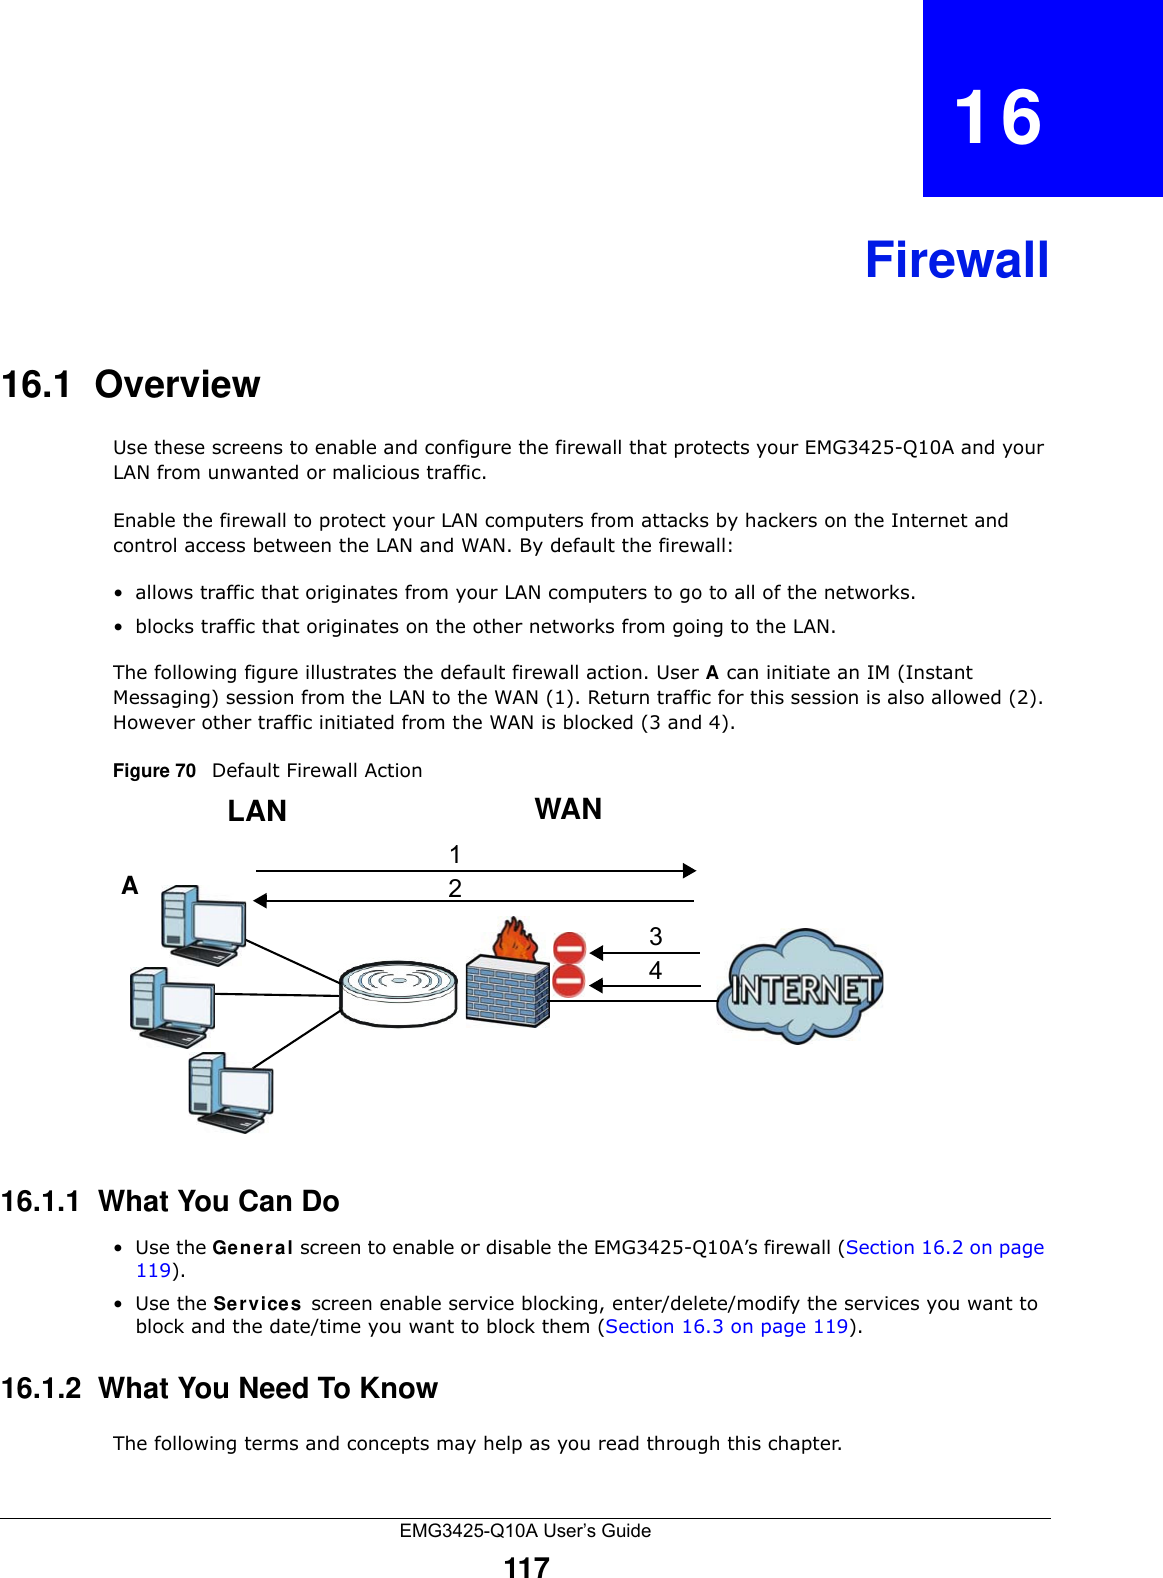 EMG3425-Q10A User’s Guide117CHAPTER   16Firewall16.1  Overview   Use these screens to enable and configure the firewall that protects your EMG3425-Q10A and your LAN from unwanted or malicious traffic.Enable the firewall to protect your LAN computers from attacks by hackers on the Internet and control access between the LAN and WAN. By default the firewall:• allows traffic that originates from your LAN computers to go to all of the networks. • blocks traffic that originates on the other networks from going to the LAN. The following figure illustrates the default firewall action. User A can initiate an IM (Instant Messaging) session from the LAN to the WAN (1). Return traffic for this session is also allowed (2). However other traffic initiated from the WAN is blocked (3 and 4).Figure 70   Default Firewall Action16.1.1  What You Can Do•Use the Ge n e r a l screen to enable or disable the EMG3425-Q10A’s firewall (Section 16.2 on page 119).•Use the Service s screen enable service blocking, enter/delete/modify the services you want to block and the date/time you want to block them (Section 16.3 on page 119).16.1.2  What You Need To KnowThe following terms and concepts may help as you read through this chapter.WANLAN3412A